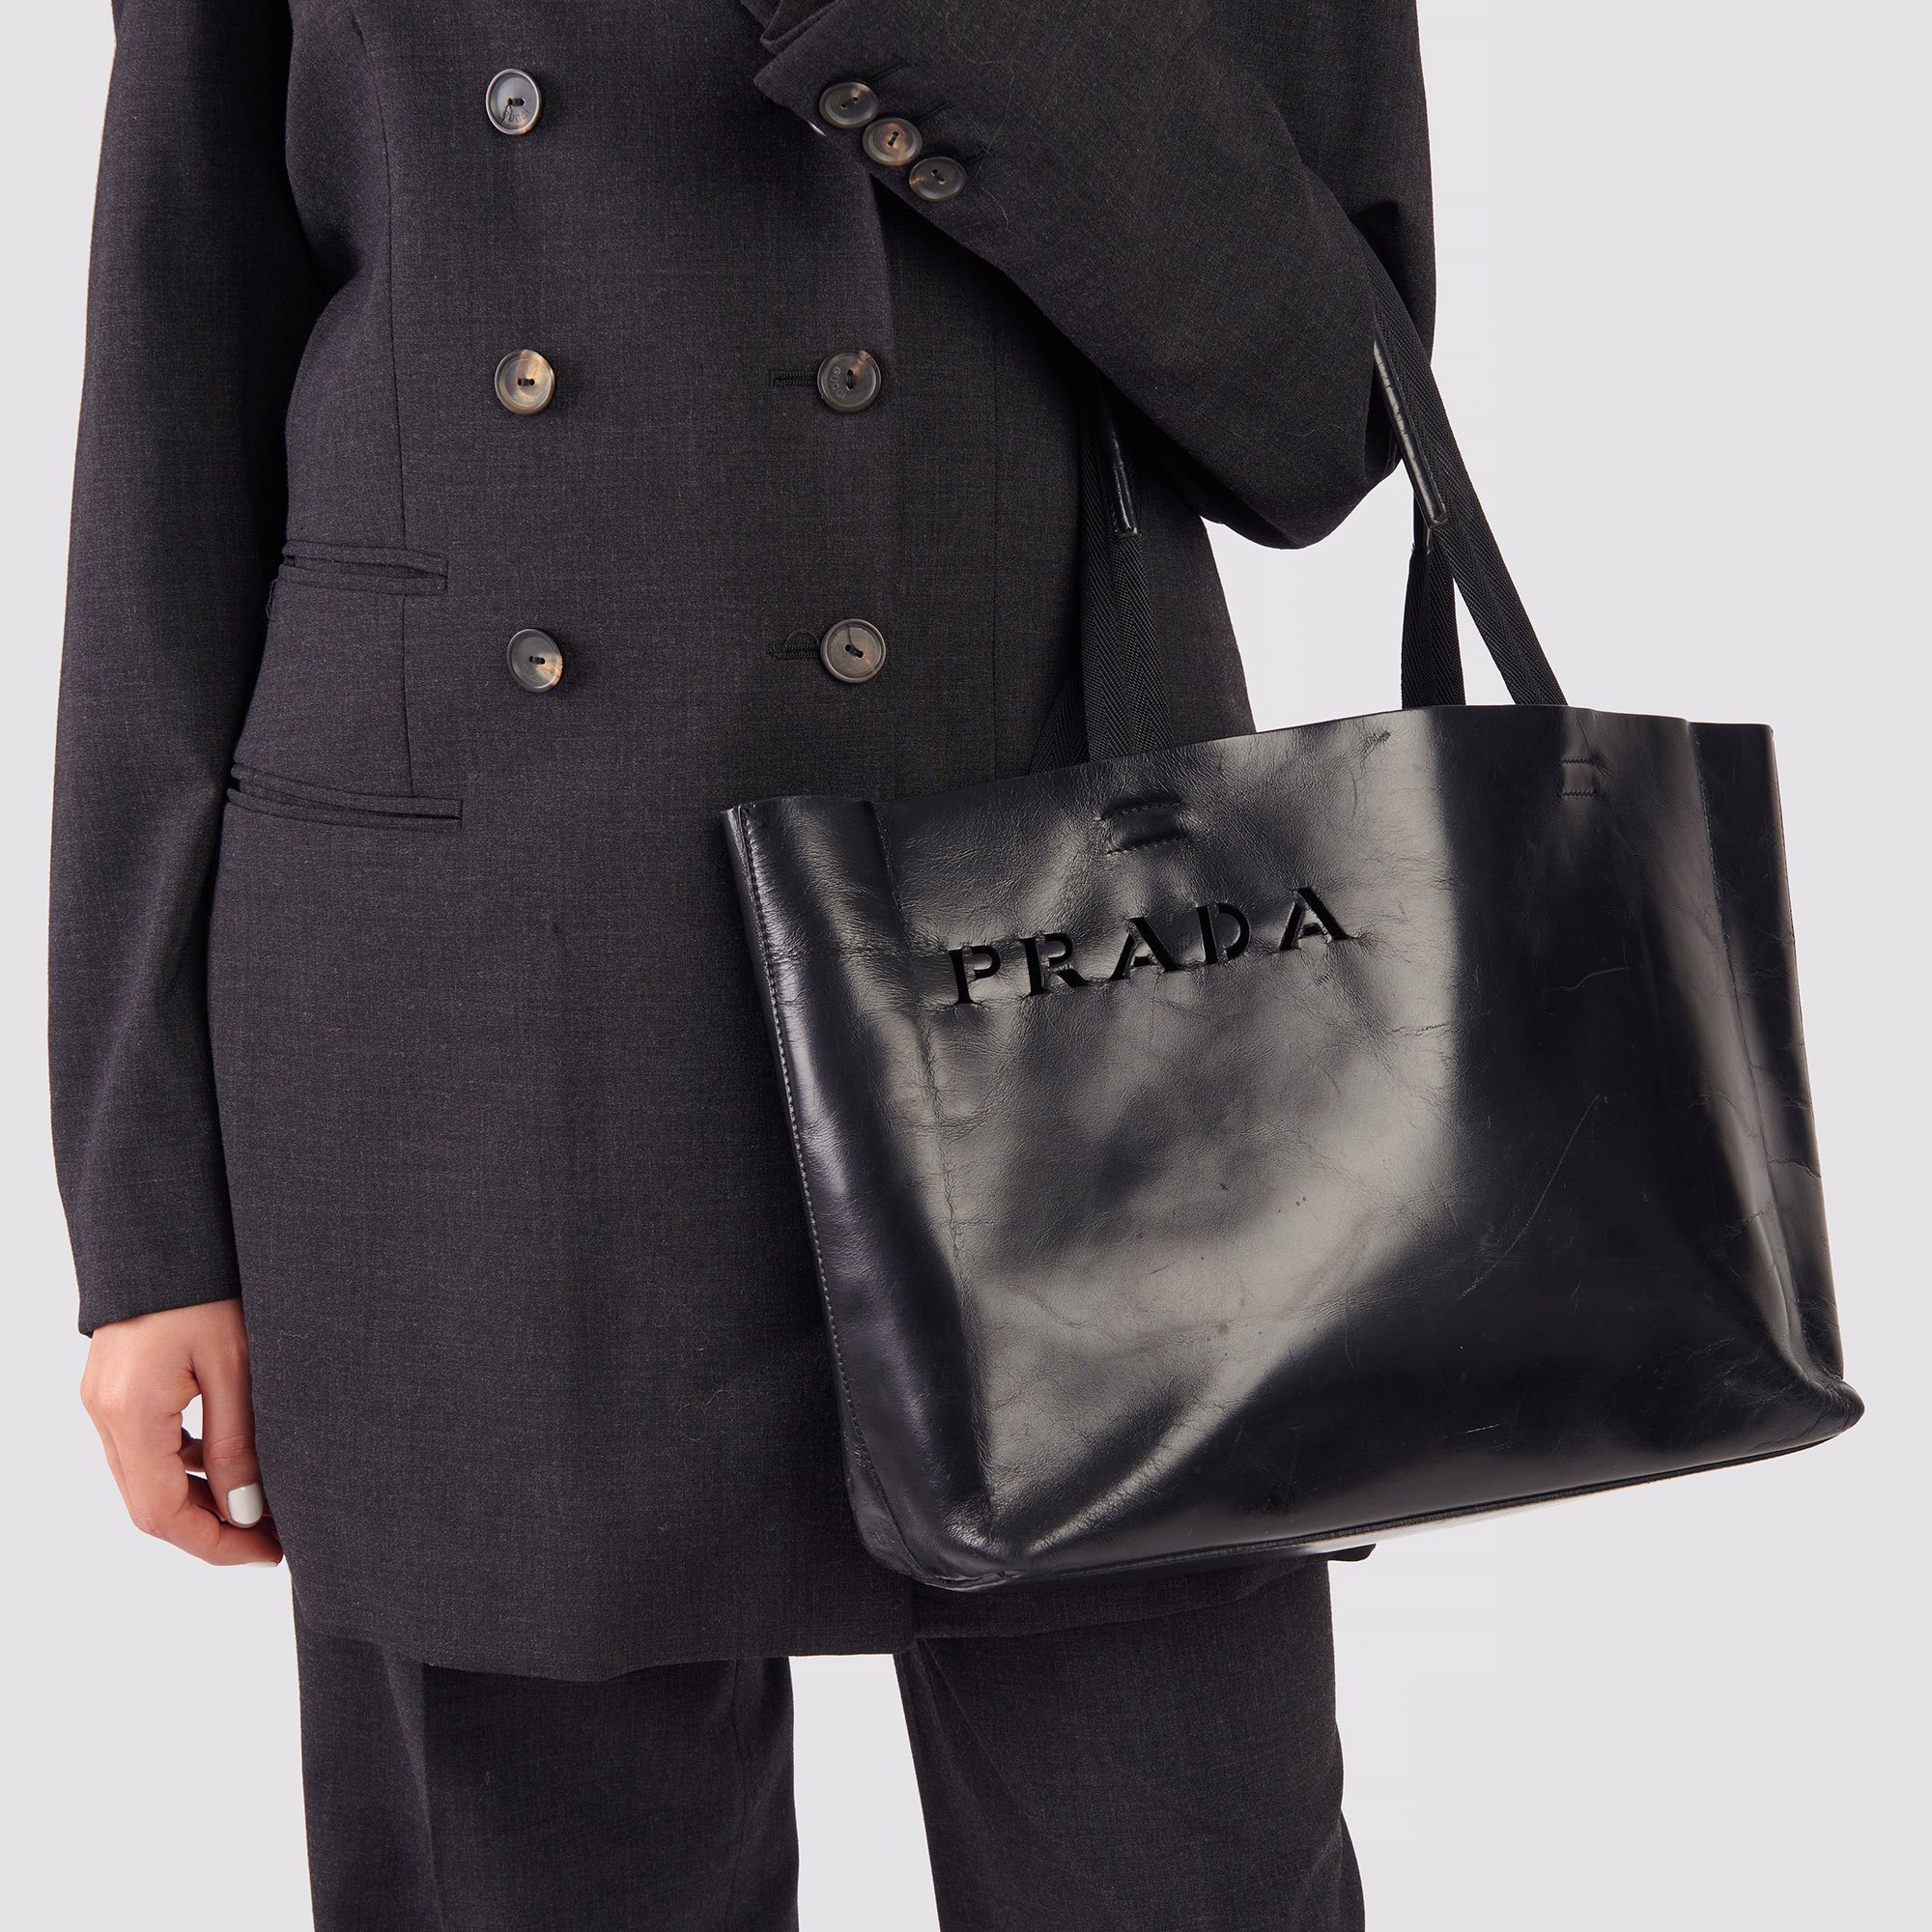 Prada Cut-Out Tote 1990's WAHF-HB014 | Second Hand Handbags | Xupes